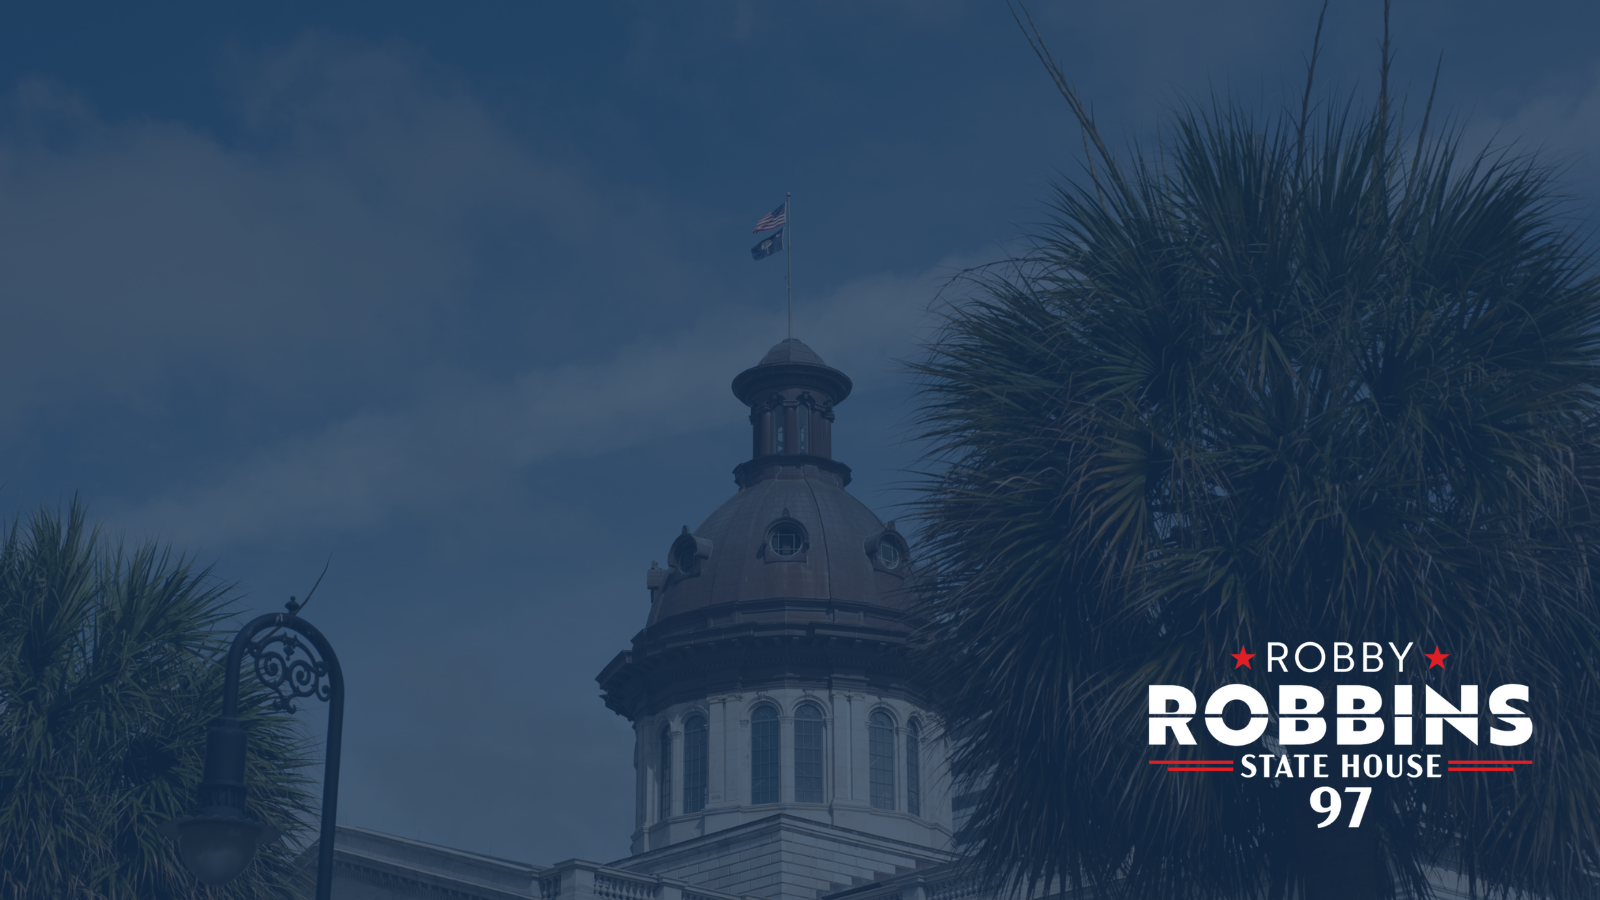 S.C. House Passes Bill to Protect Children